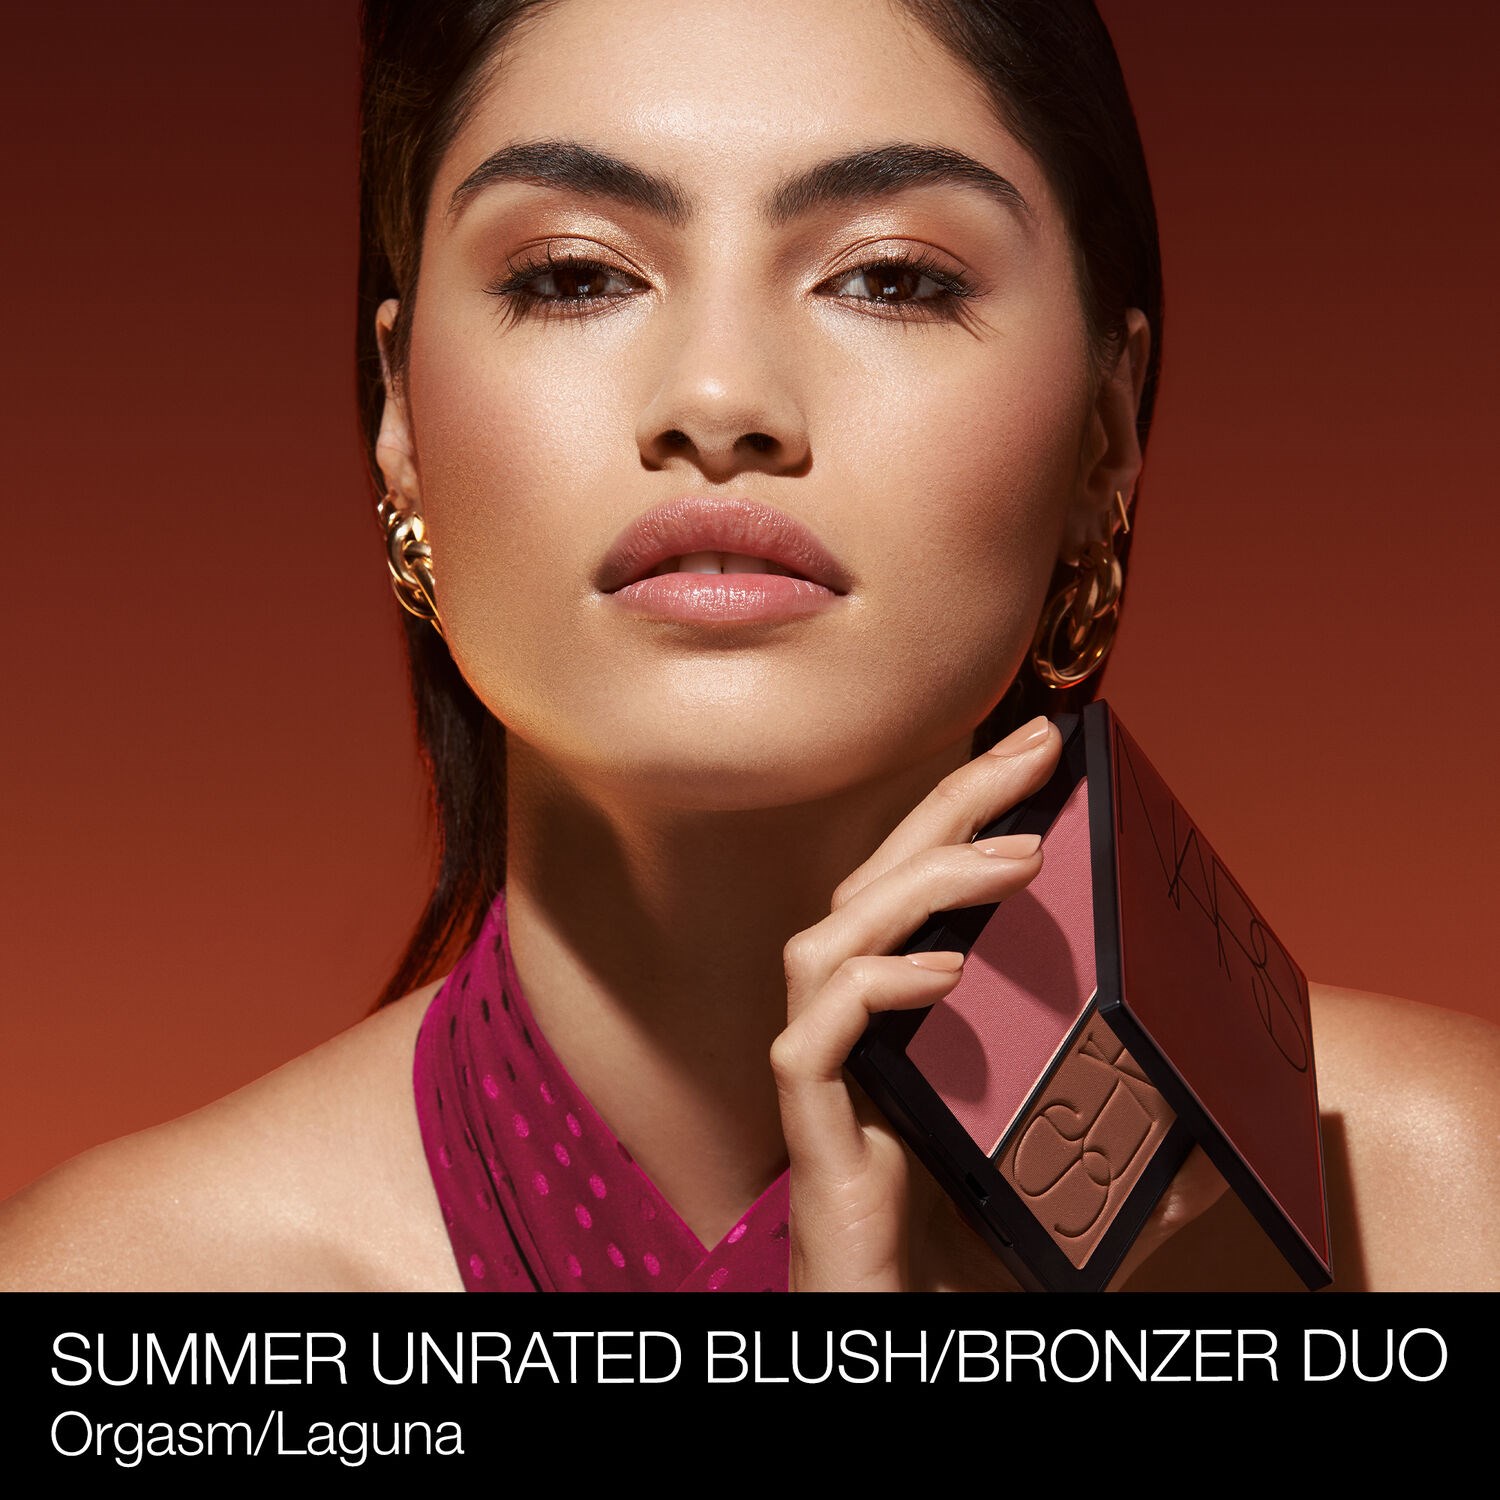 SUMMER UNRATED BLUSH/BRONZER DUO 9